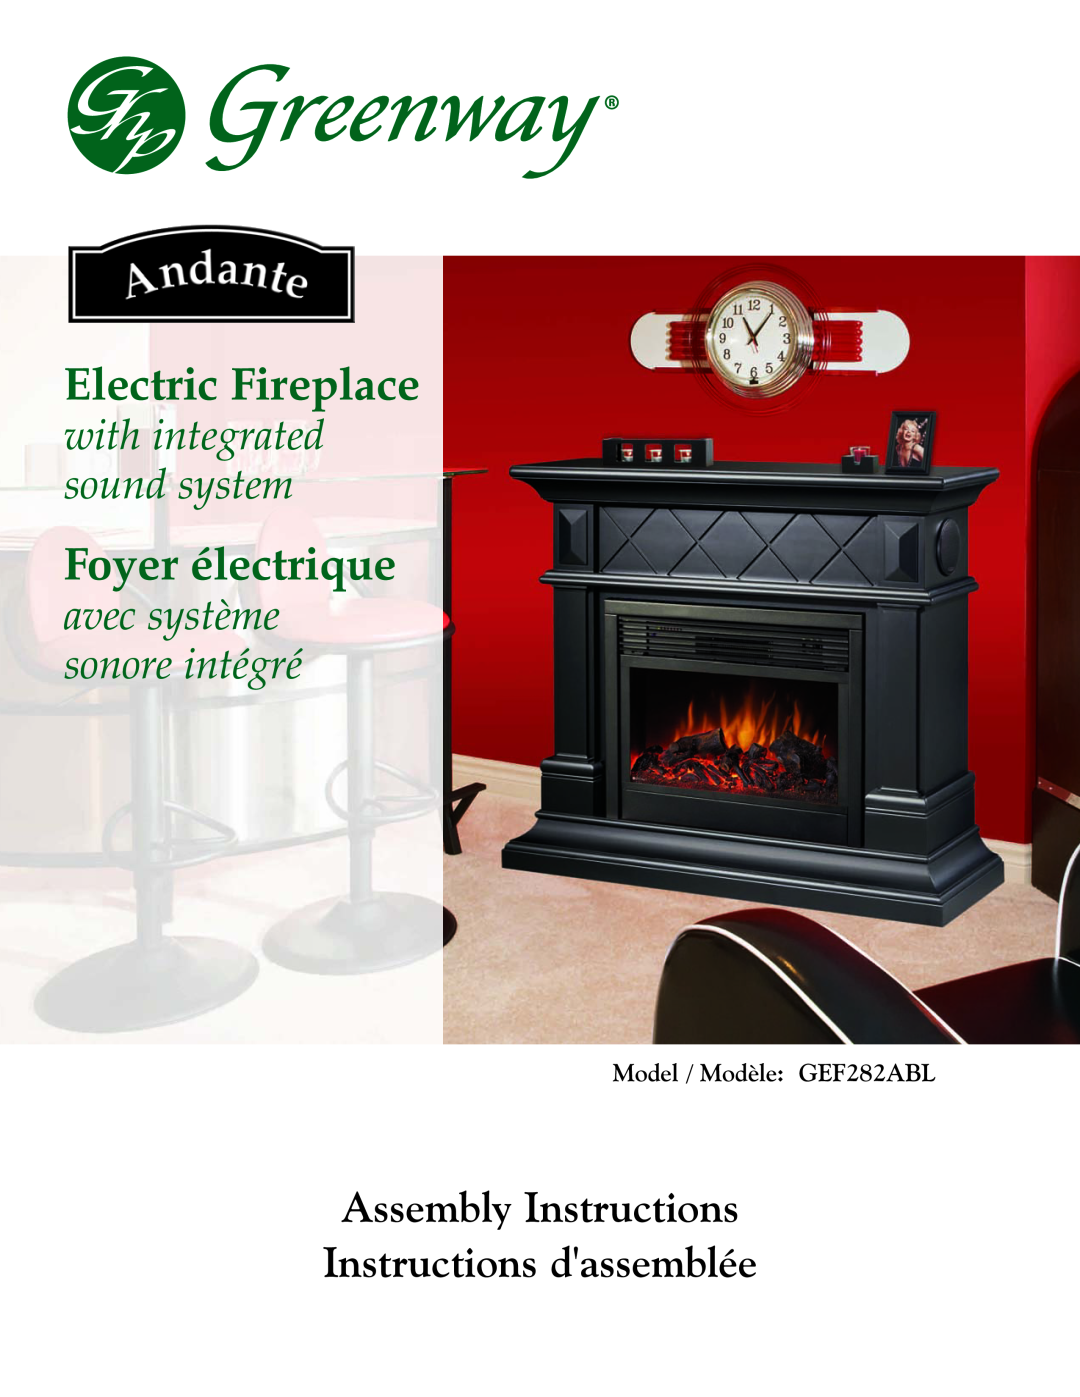 Greenway Home Products GEF282ABL manual Electric Fireplace, Foyer électrique, with integrated sound system 